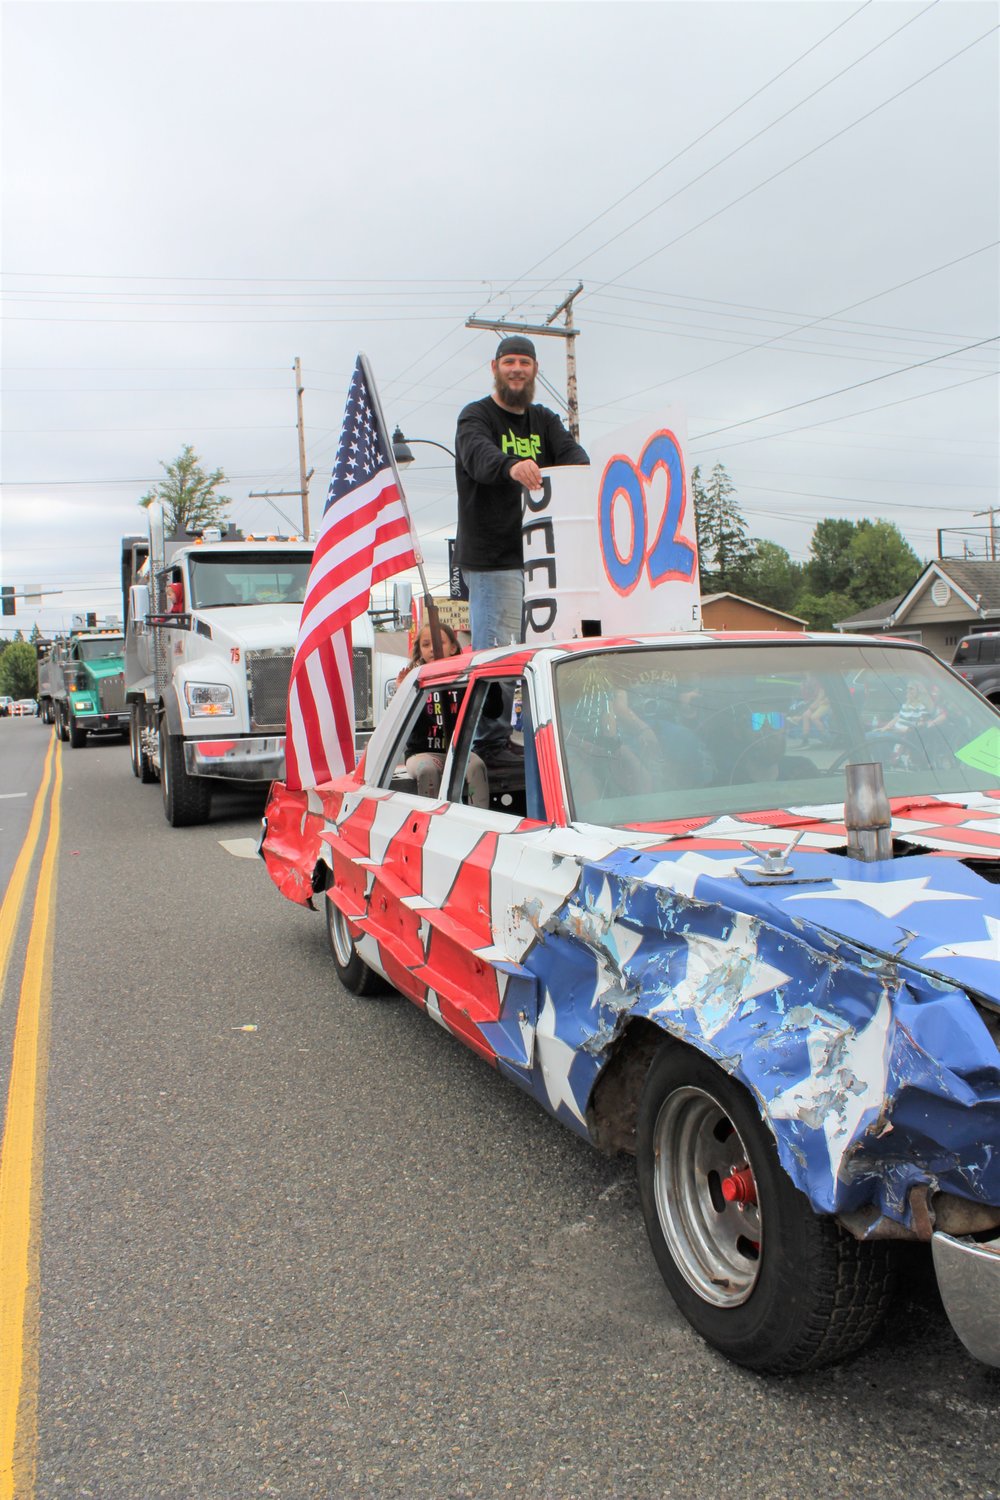 Jordan Hunter of Winlock waves from the top of Brad Hunter's demolition derby car, which won best of show at Centralia's Summerfest derby.